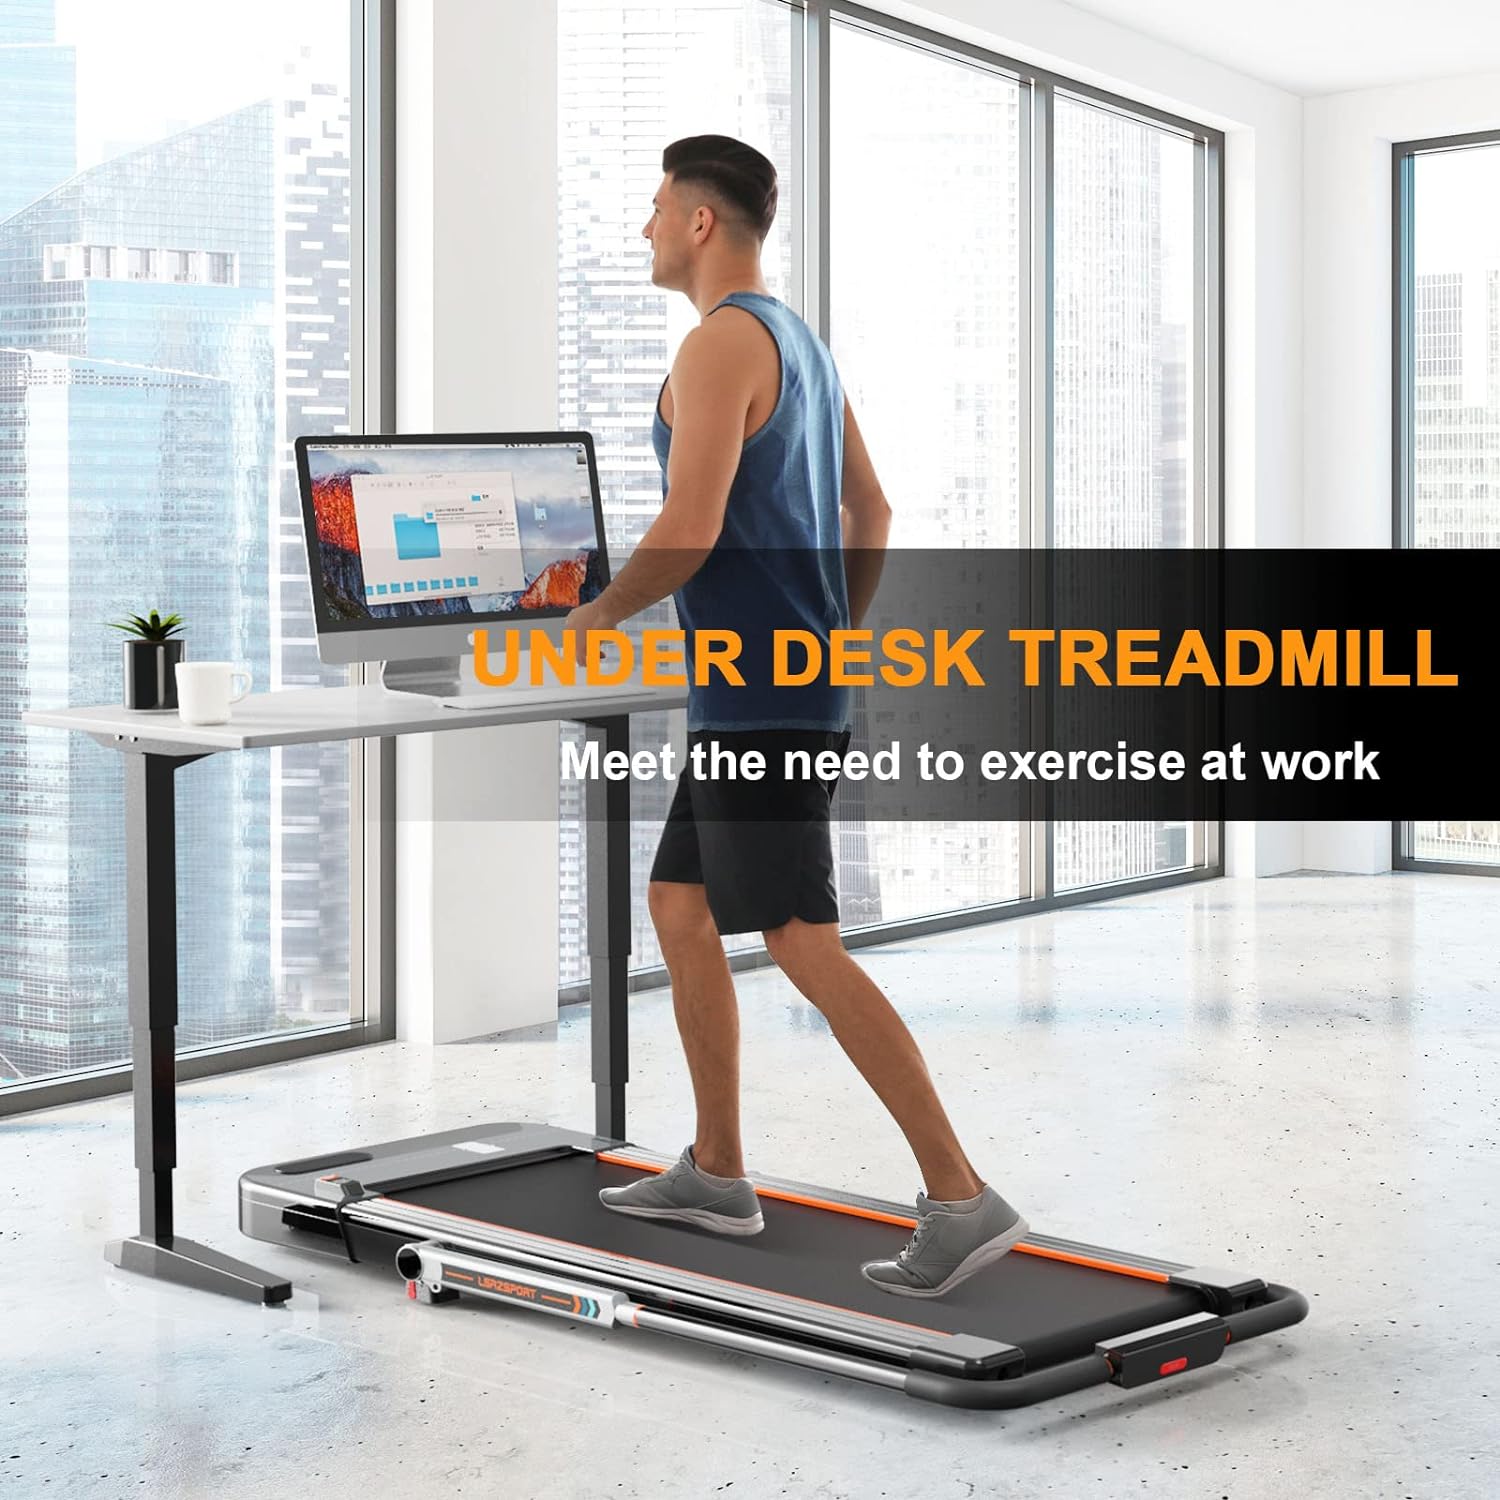 LSRZSPORT Under Desk Treadmill, 2 in 1 Folding Treadmills for Home Portable Compact 2.5HP Walking Pad Treadmill Under Desk Running Machine with Remote Control Speaker,Easy to Fold